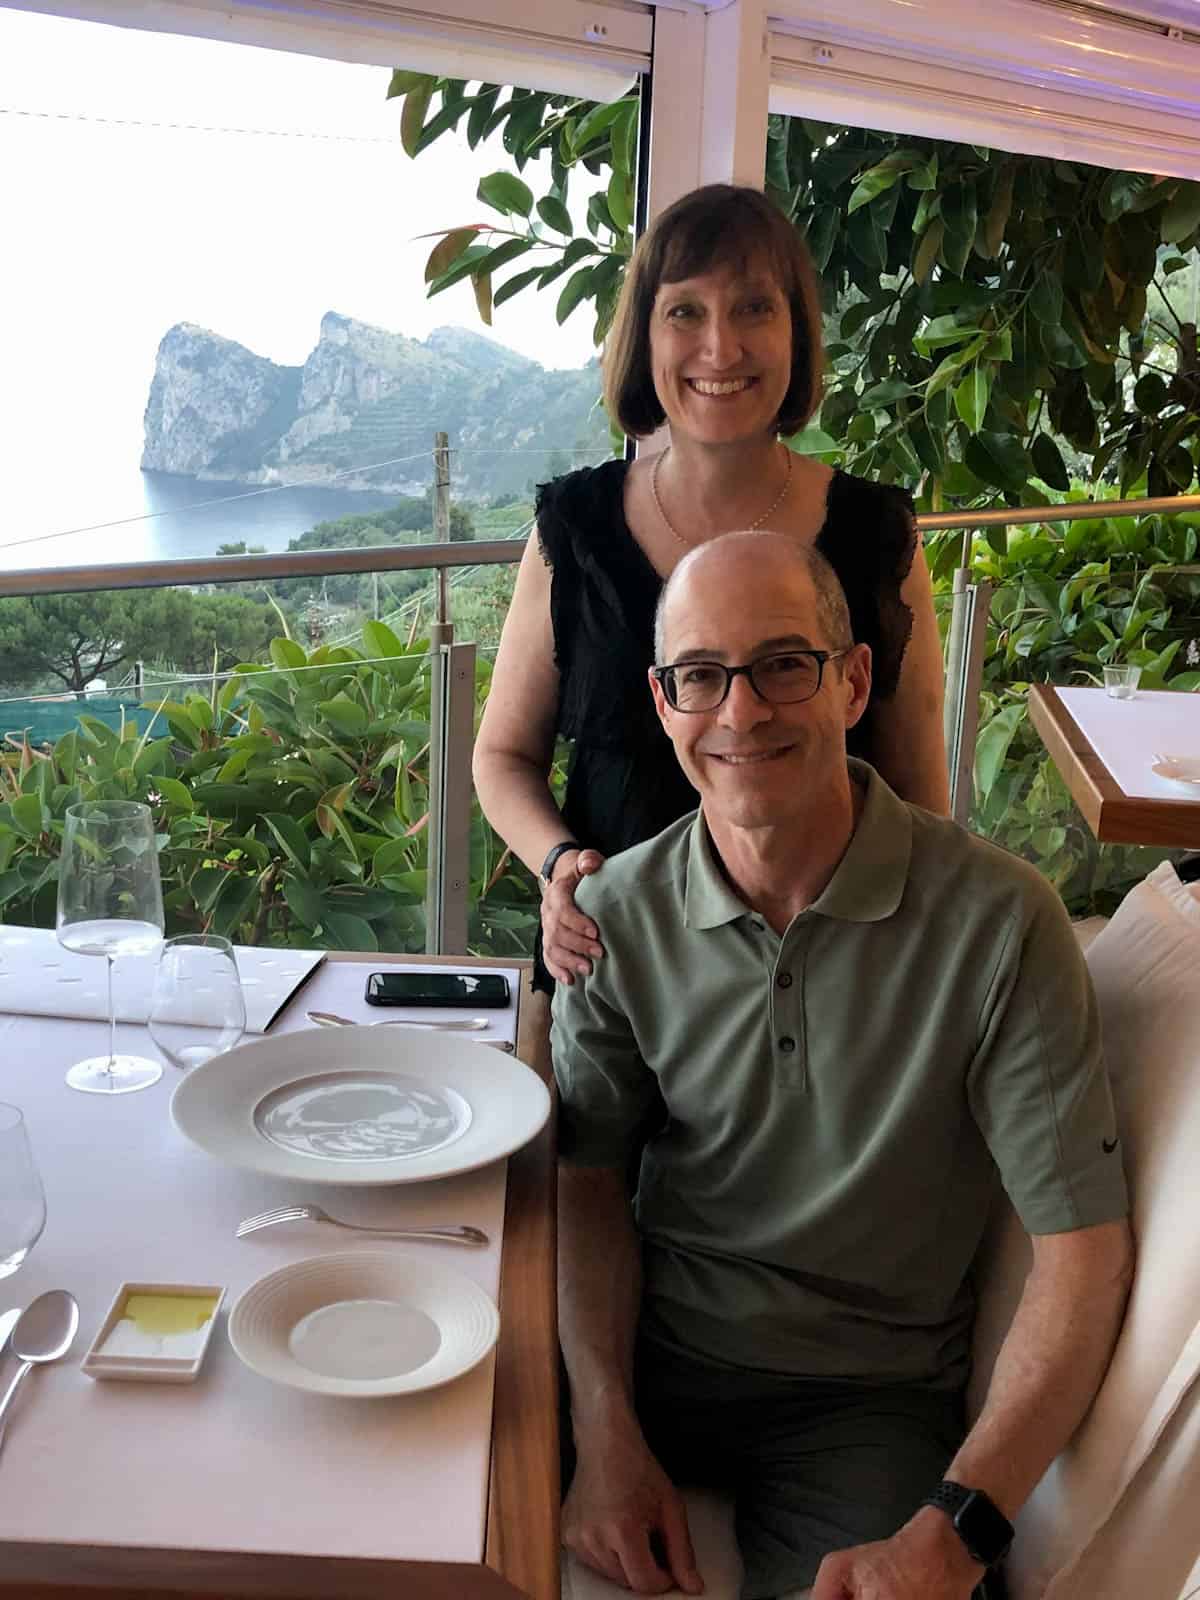 Dana and her husband at a restaurant table overlooking the Bay of Nerano in Italy.